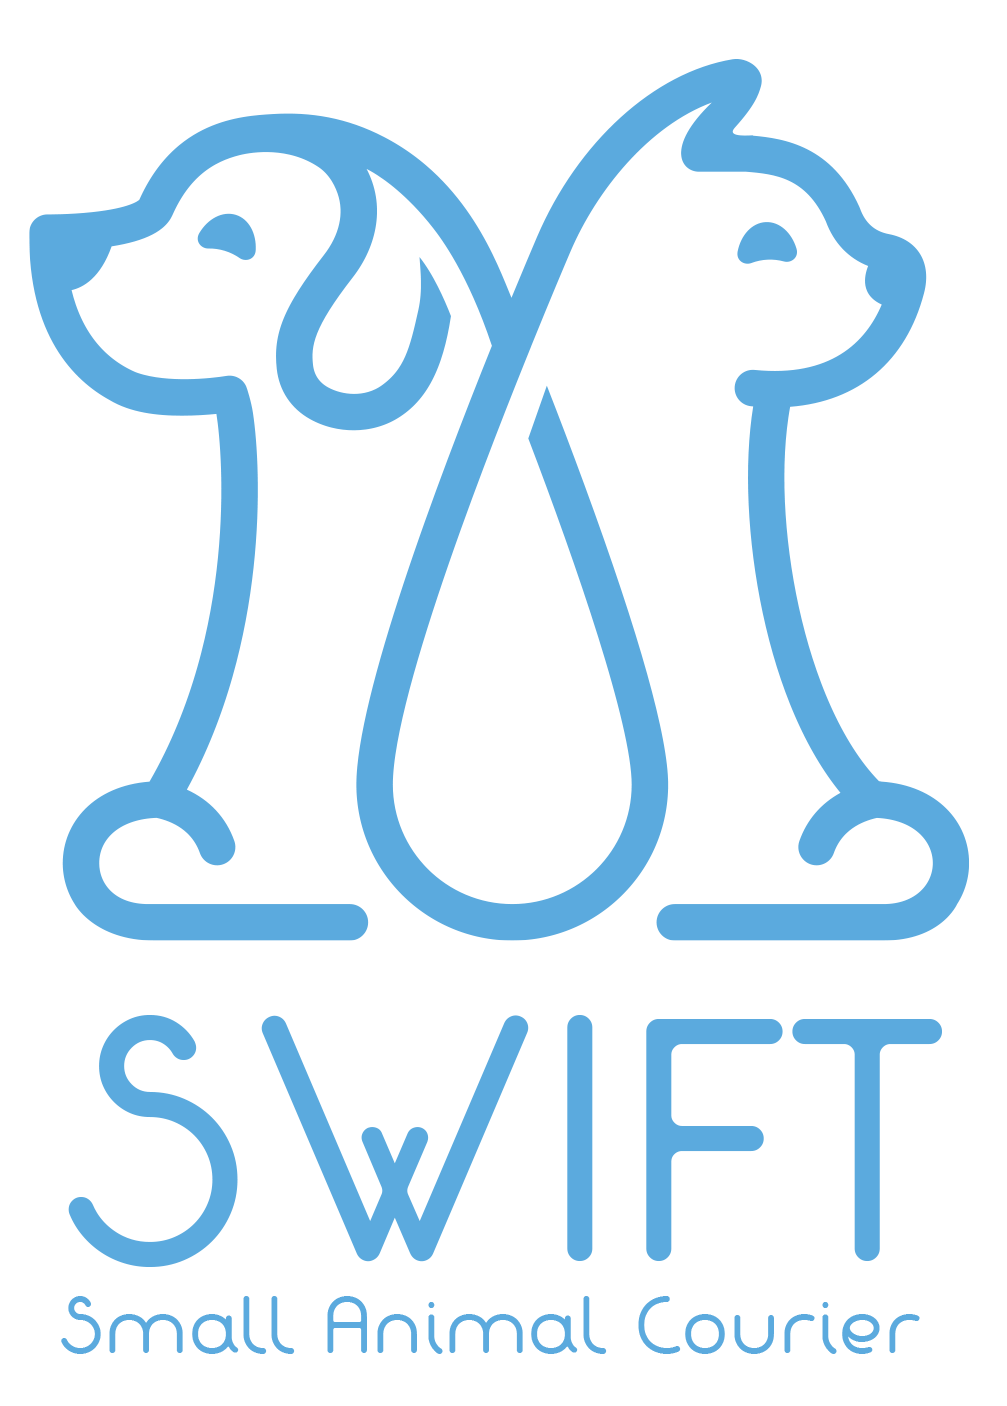 Swift Small Animal Courier